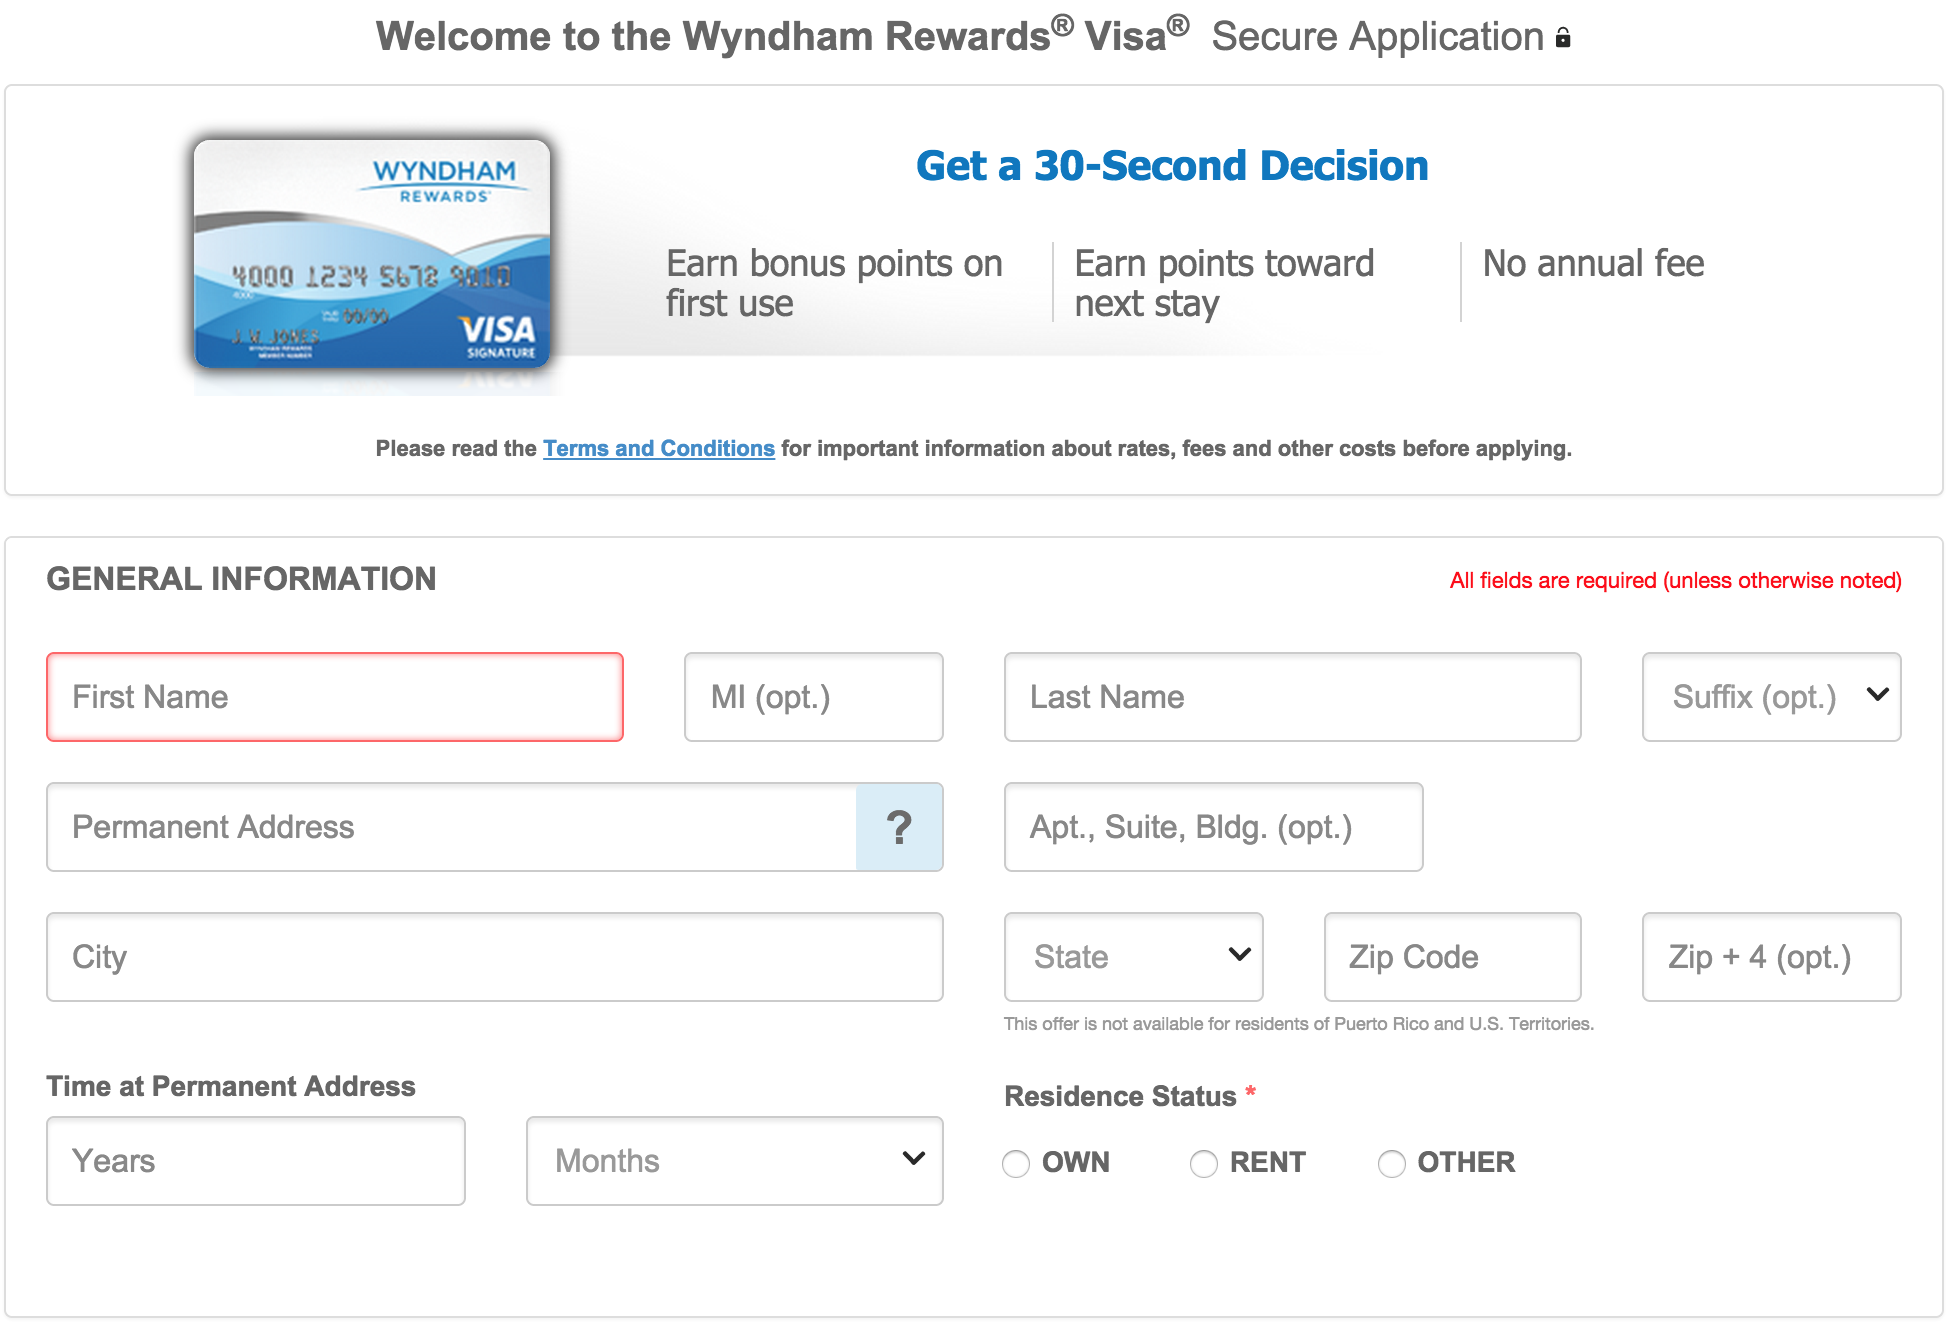 How to Apply for the Wyndham Rewards Visa Credit Card